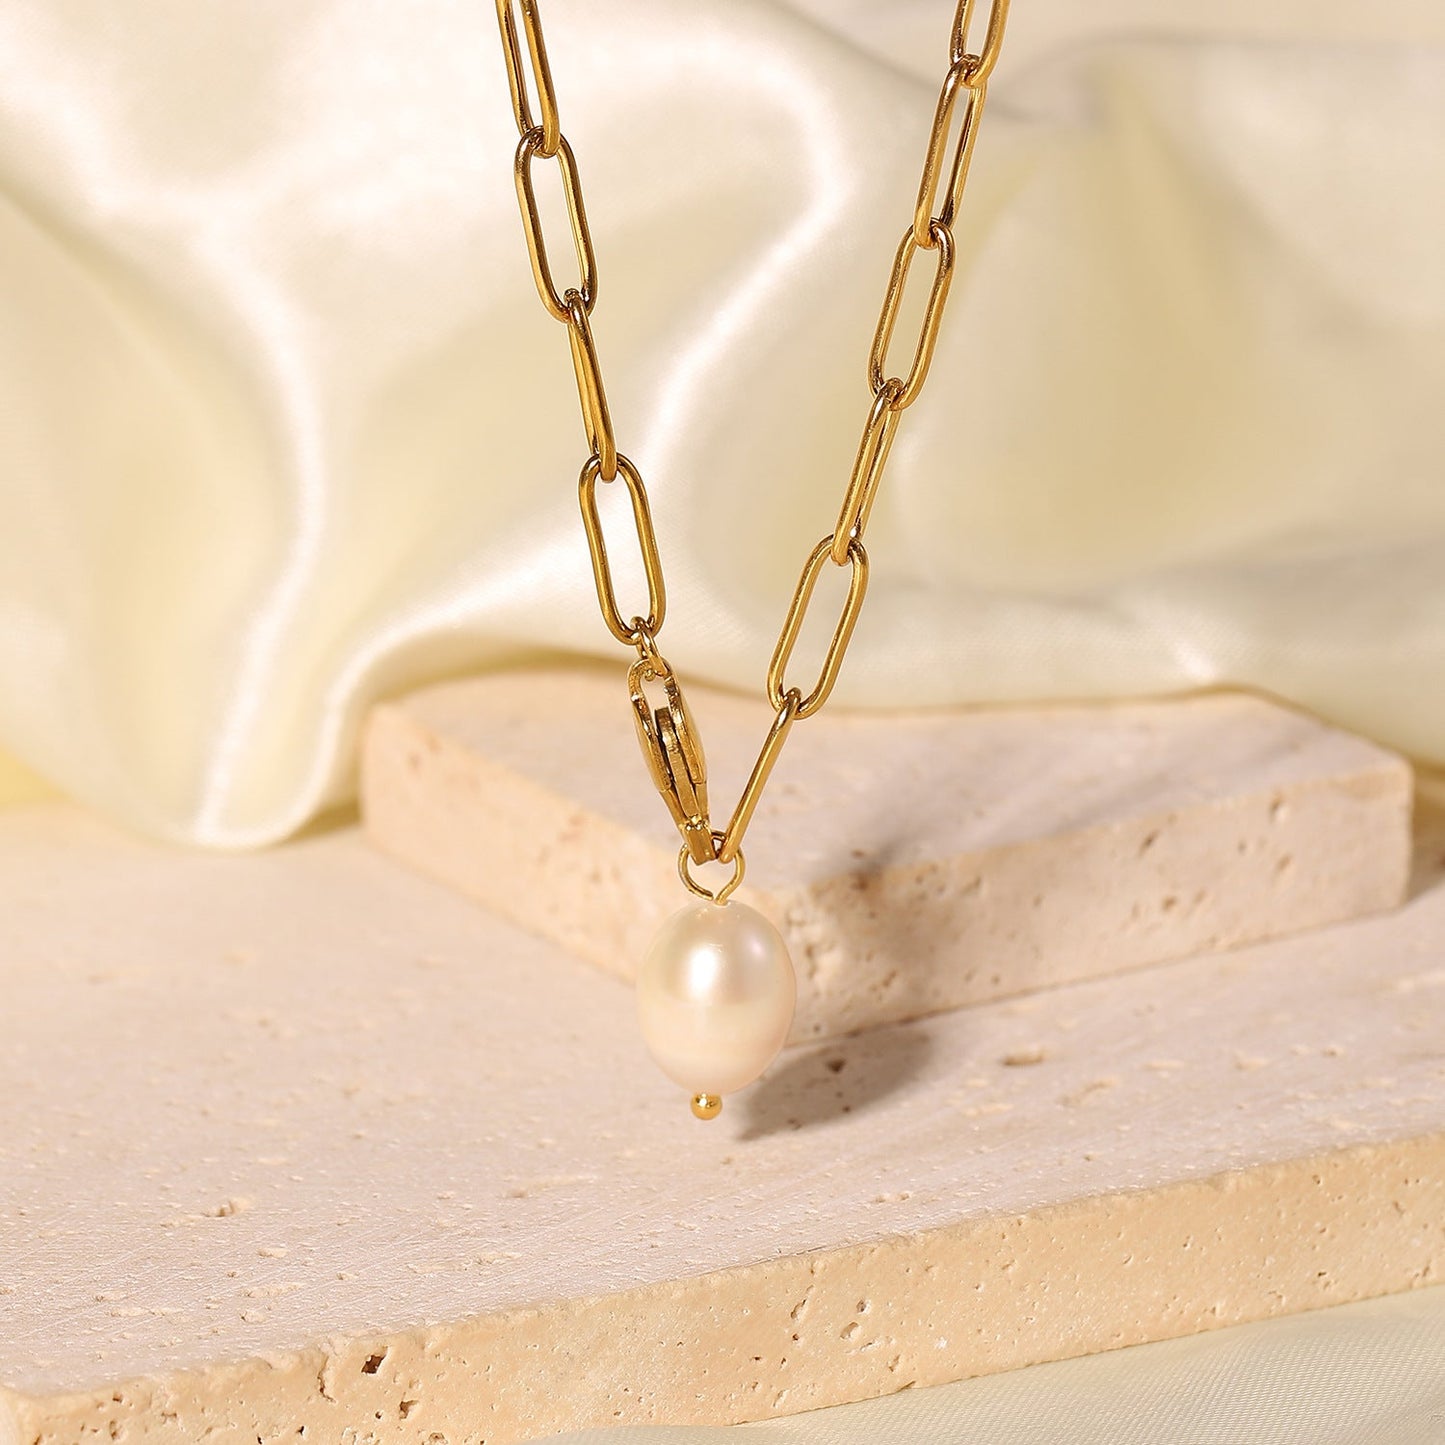 Gold Link Necklace with Freshwater Pearl and Adjustable Clasp Stainless Steel